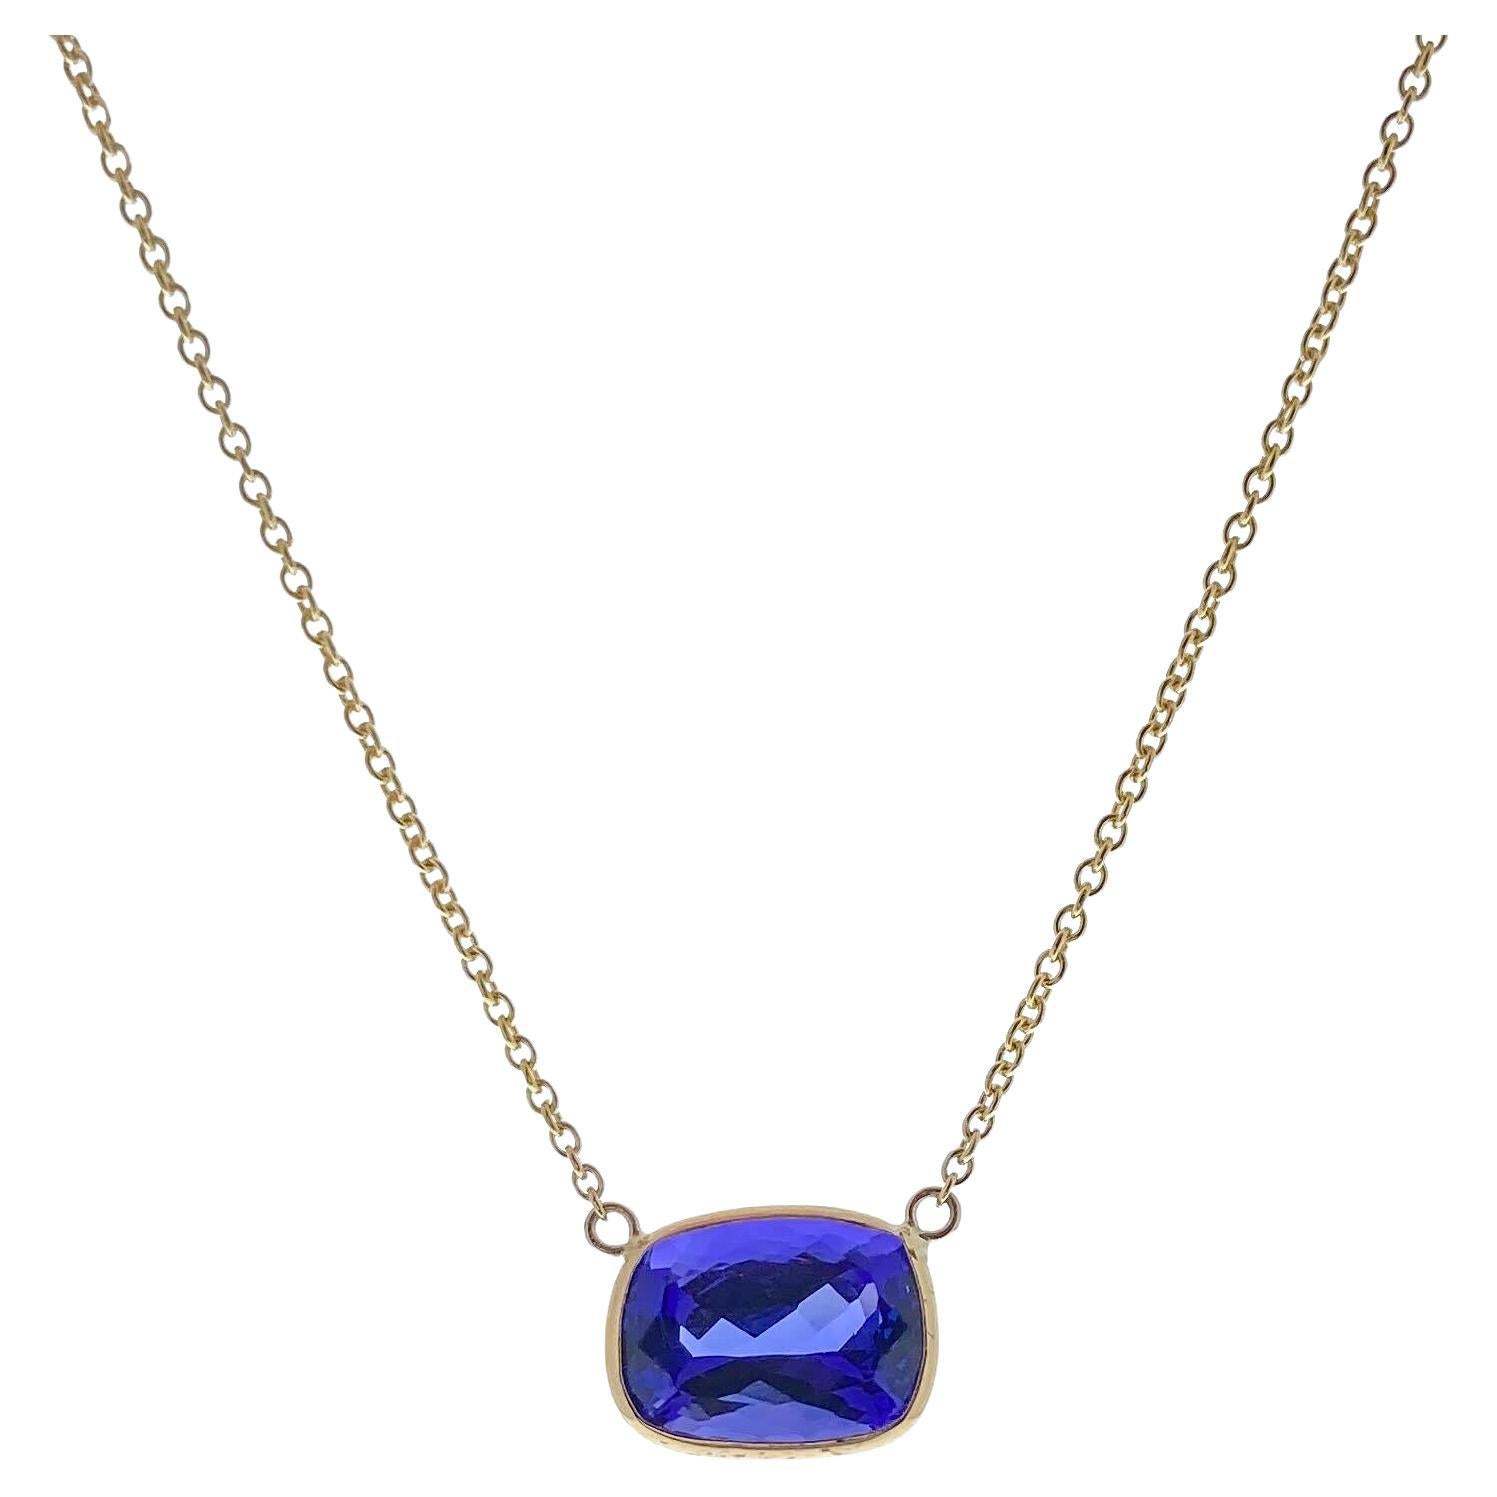 4.25 Carat Cushion Blue Tanzanite Fashion Necklaces In 14k Yellow Gold  For Sale